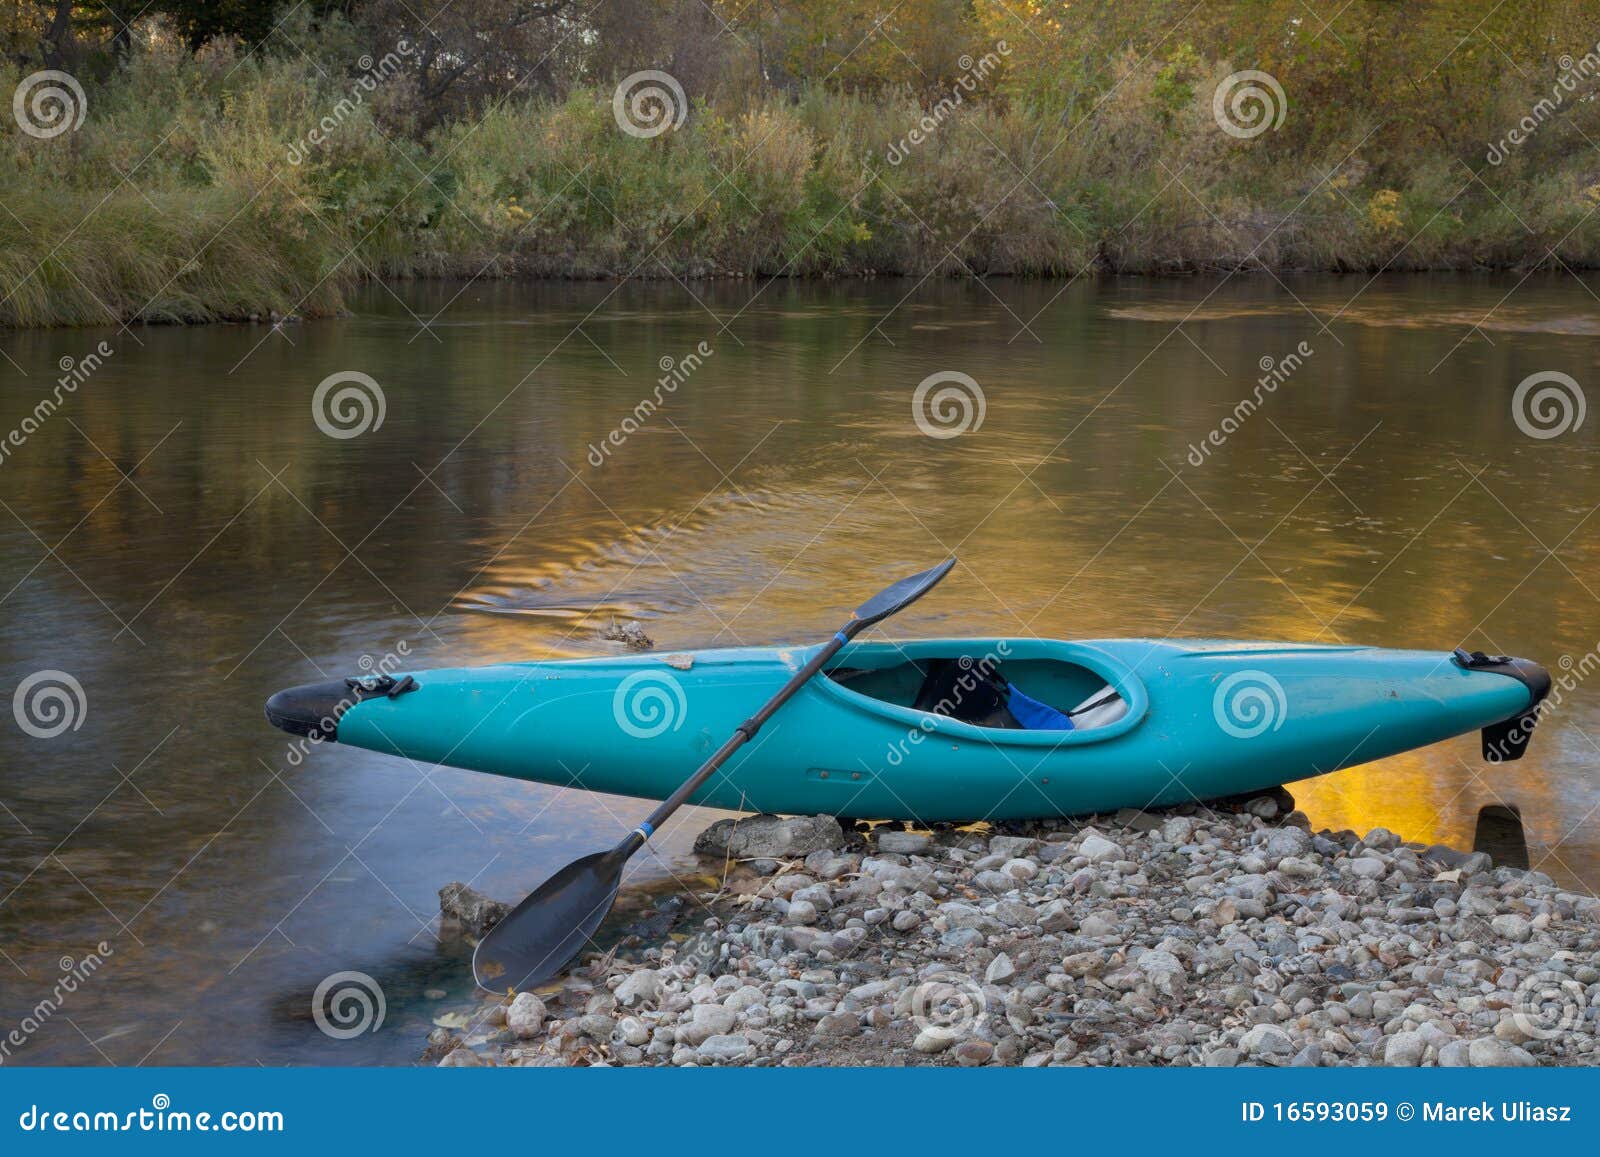 Blue whitewater kayak on a rocky shore against river with gold color 